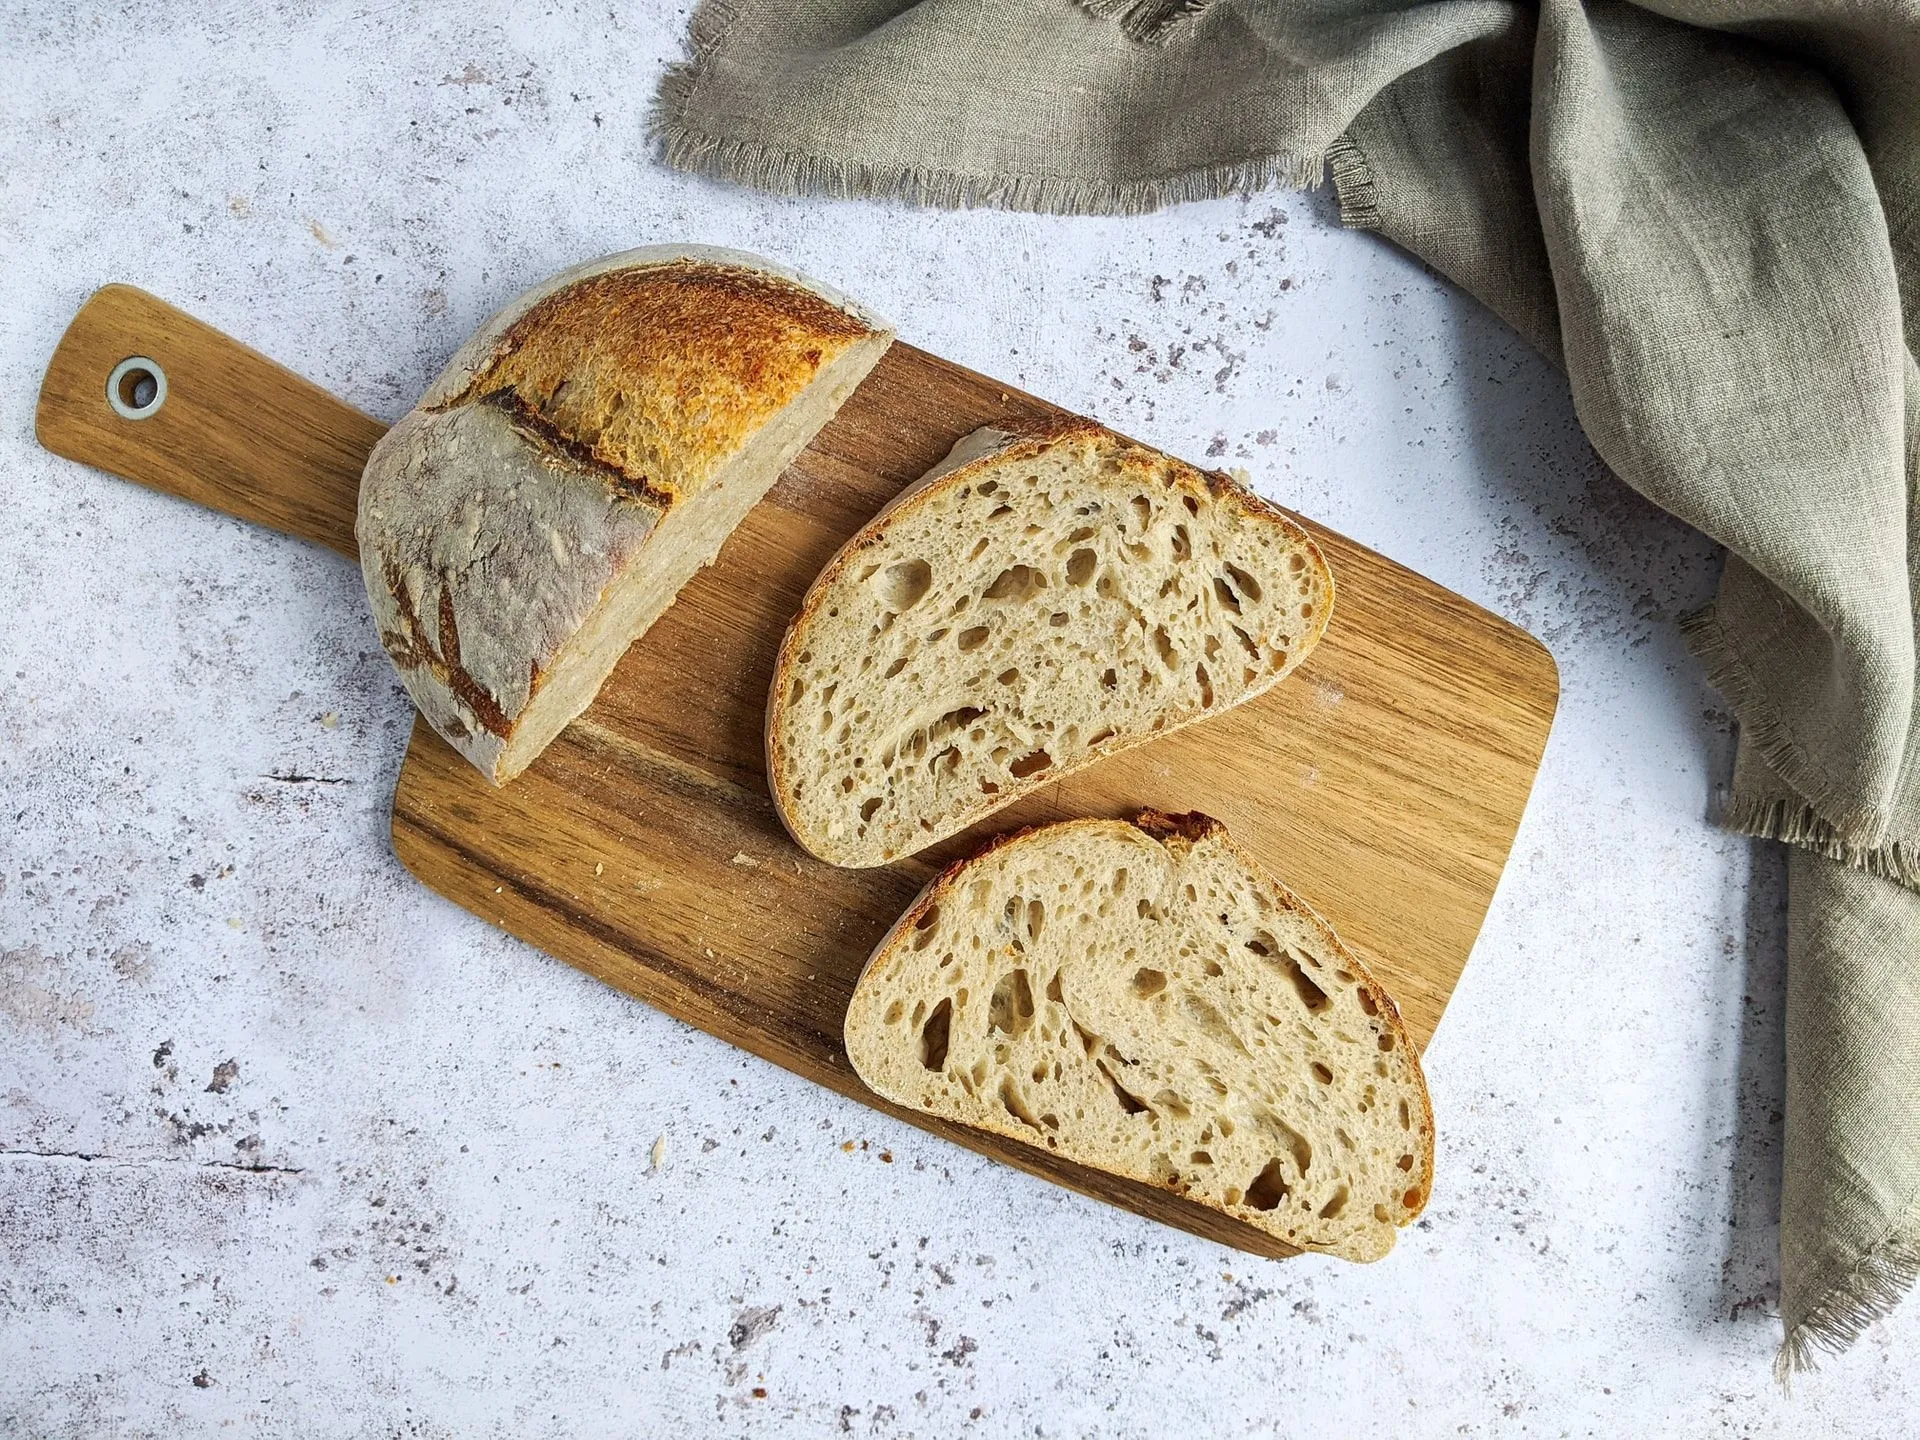 Sourdough is one of the most popular bread types among bakers.